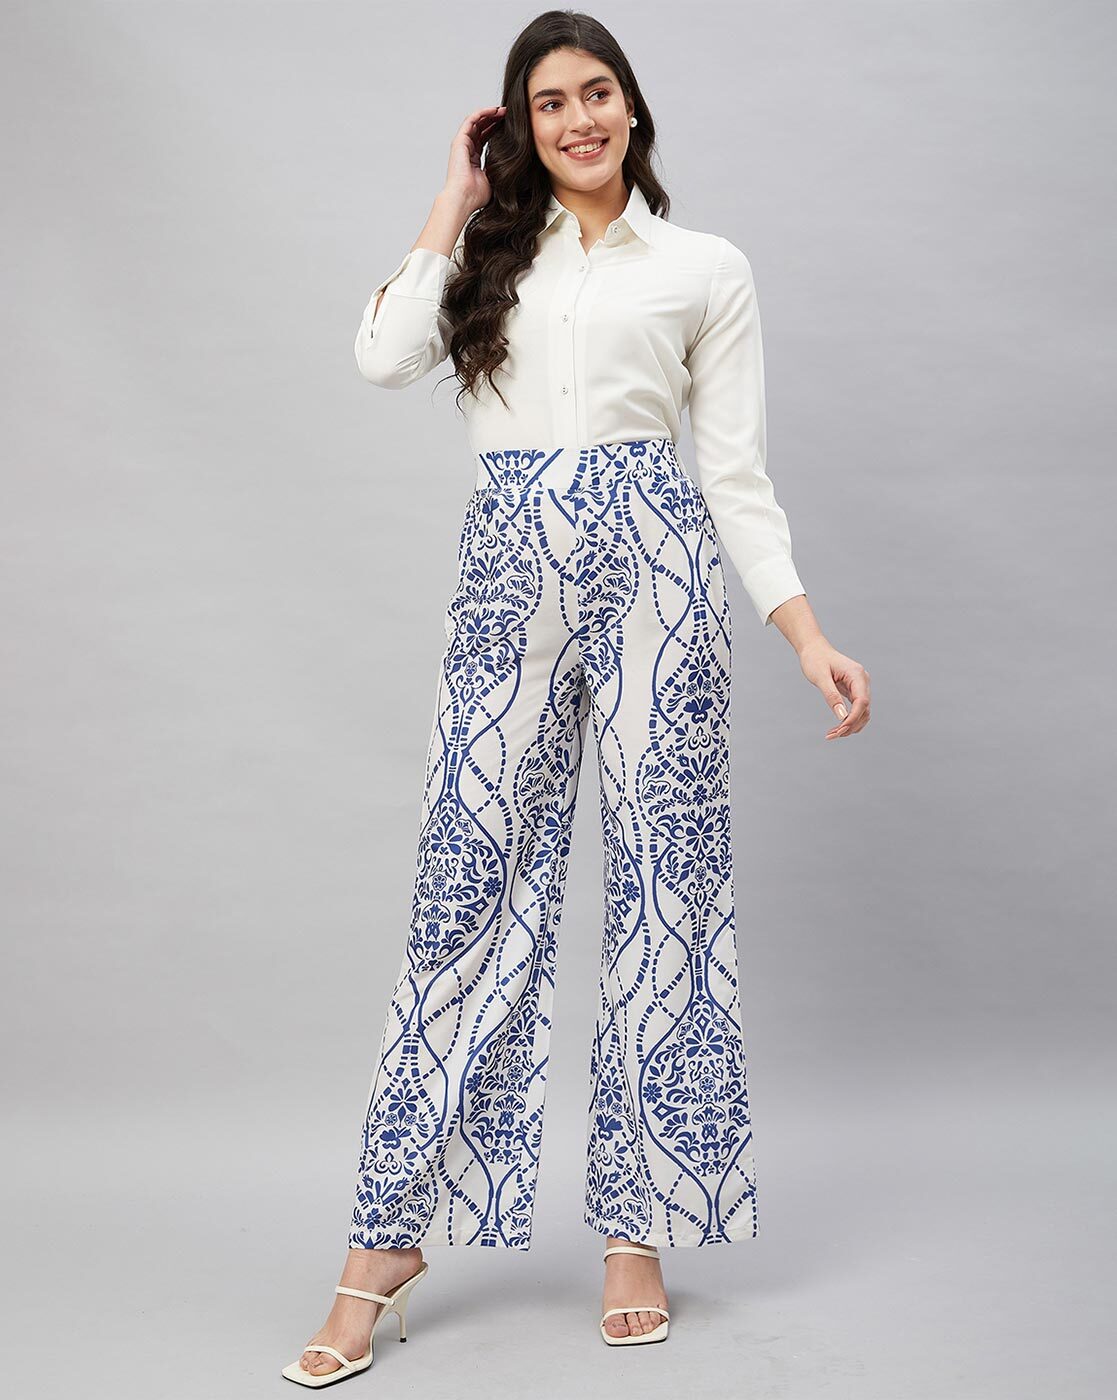 Wendy Trendy - Linen palazzo trousers with super cropped... | Facebook